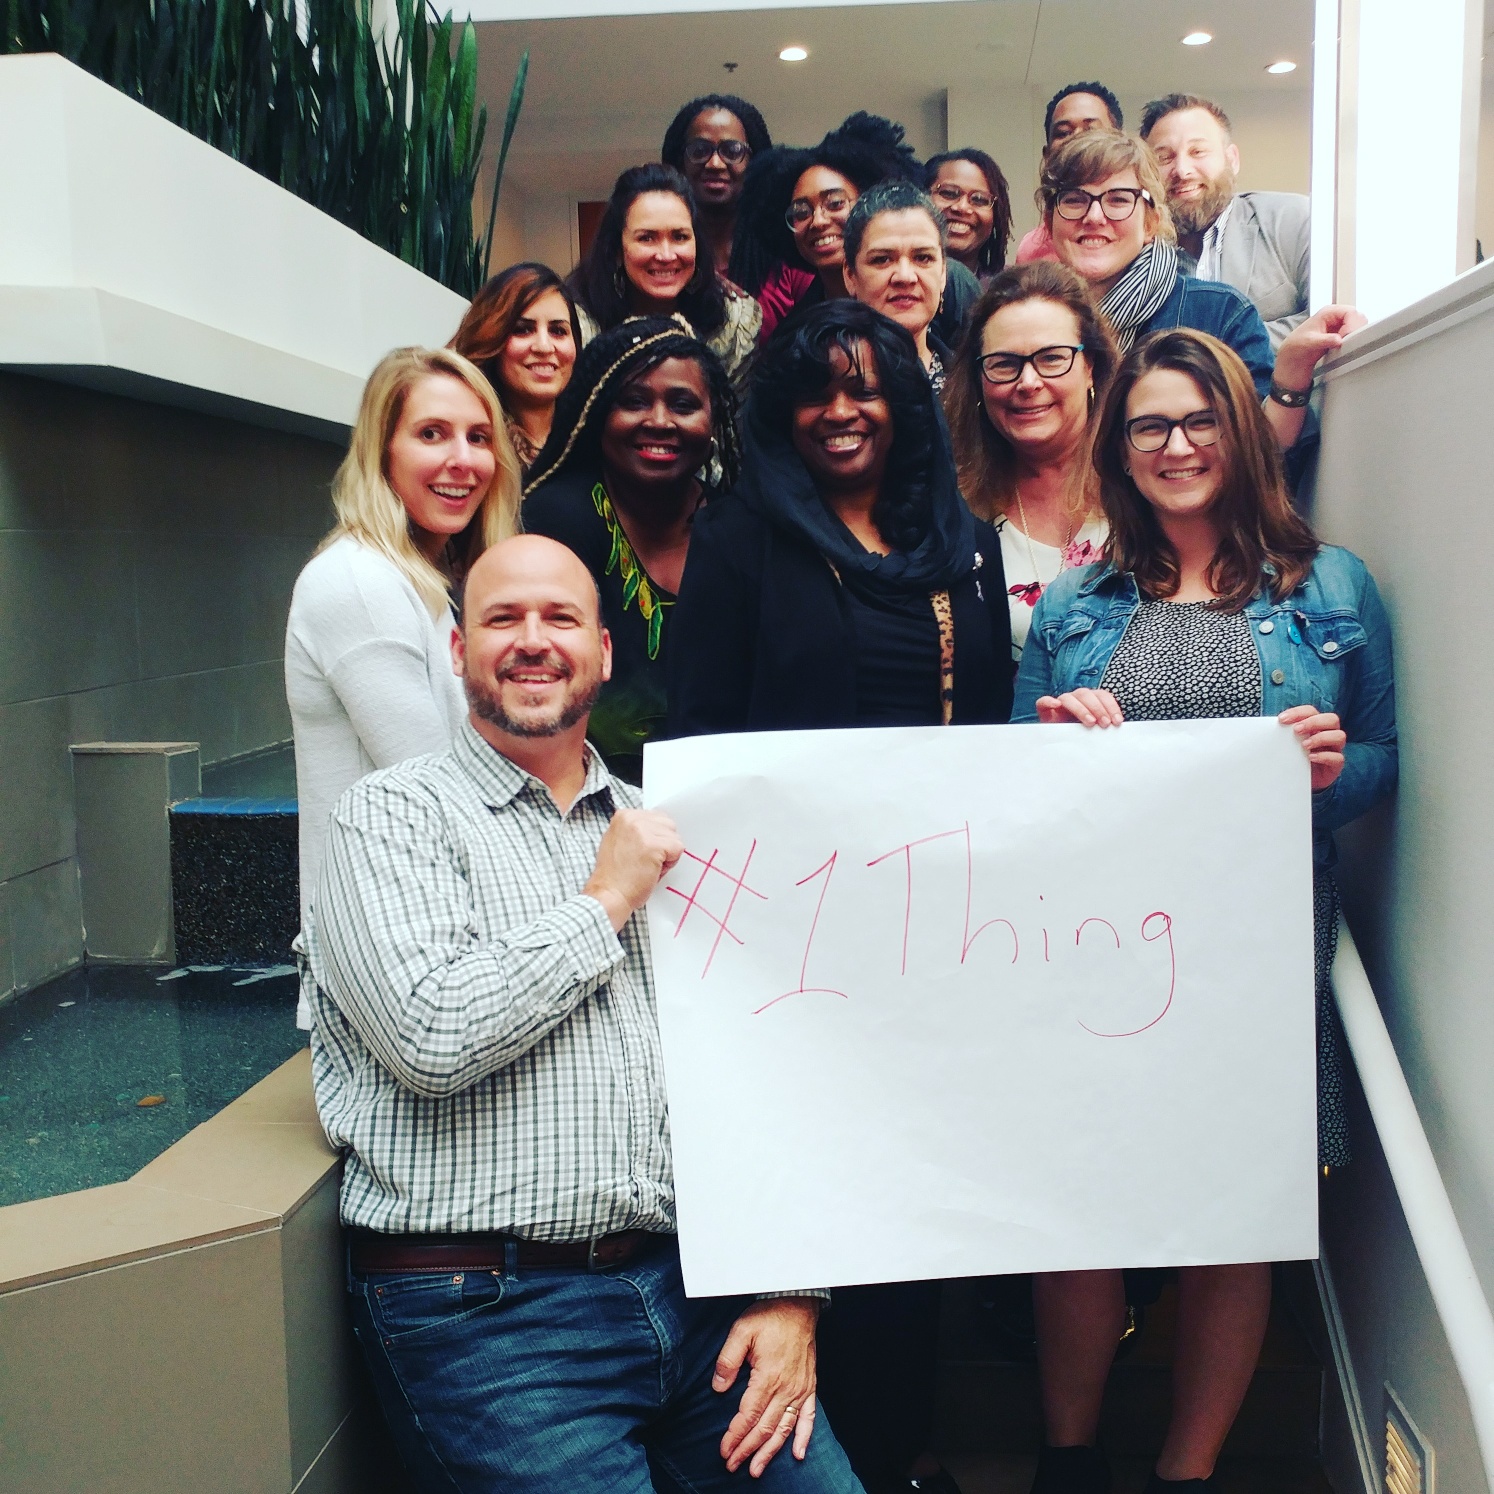 Members of the DVAP Advisory Board holding a #1Thing sign.